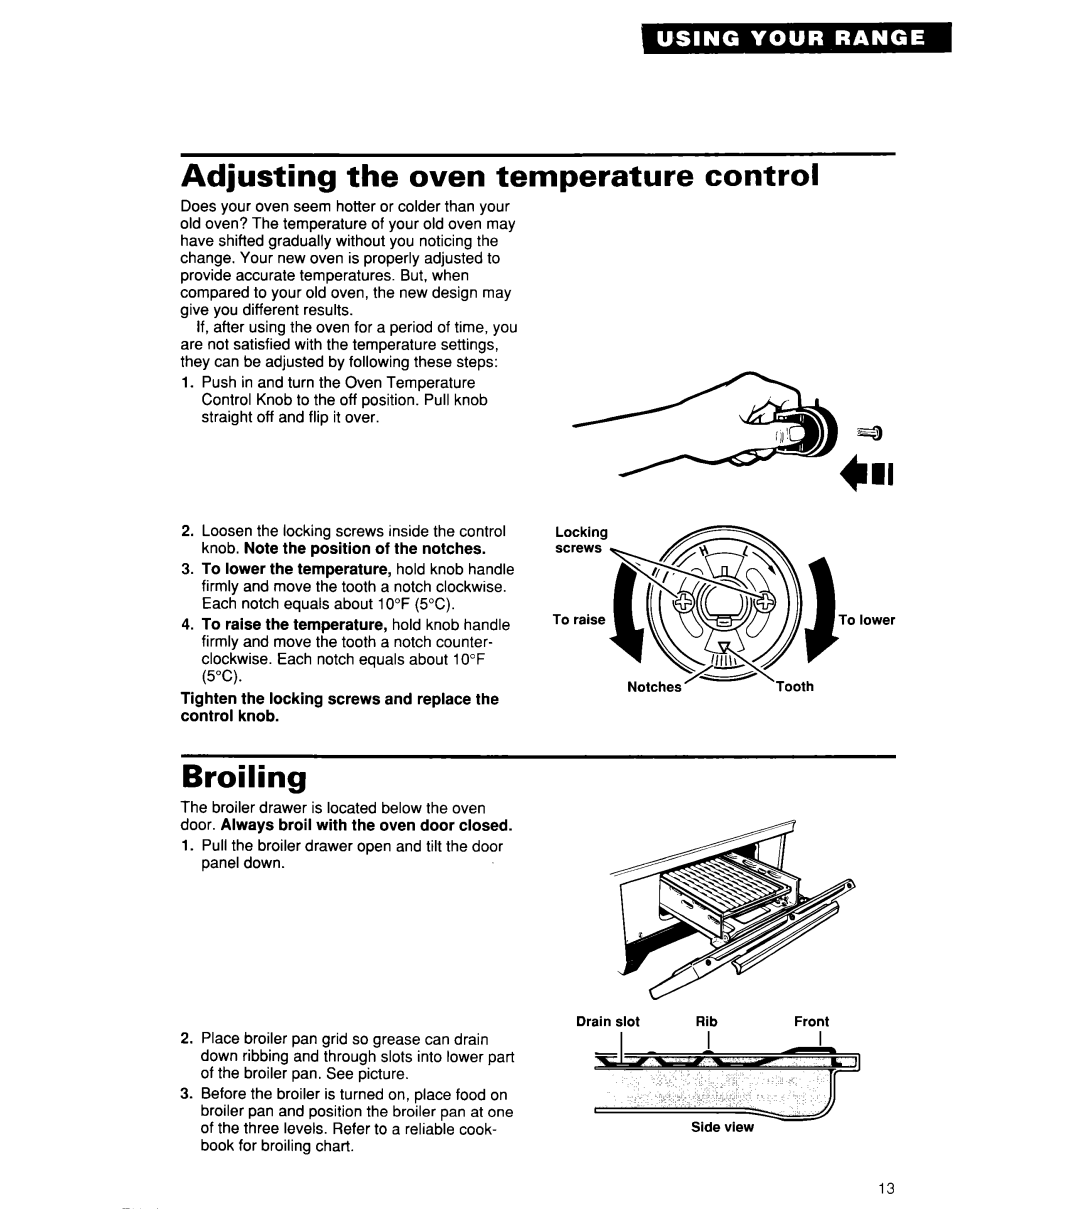 Whirlpool SF3000SY/EY, SF302BSY/BEY, SF304BSY important safety instructions Adjusting the oven temperature control, Broiling 